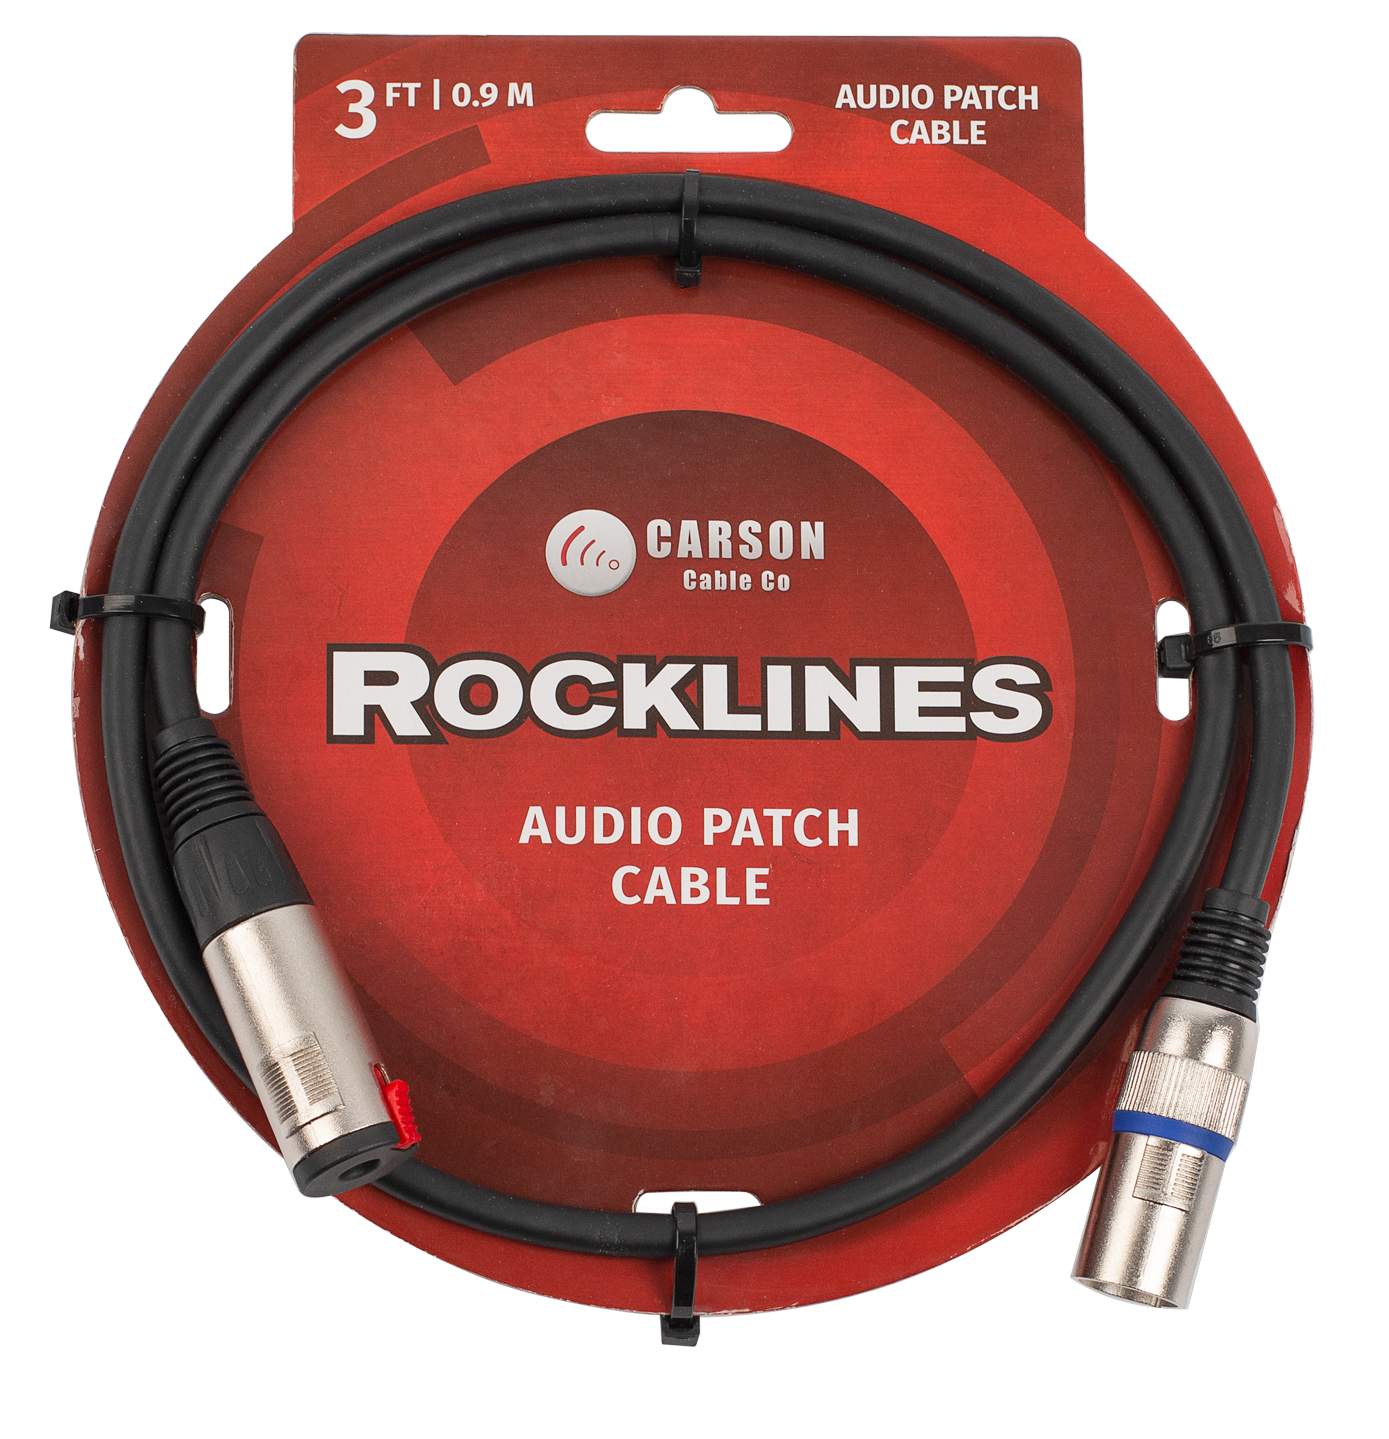 Carson Rocklines RAD34 Audio Patch Cable XLR Male/TRS Female 3ft